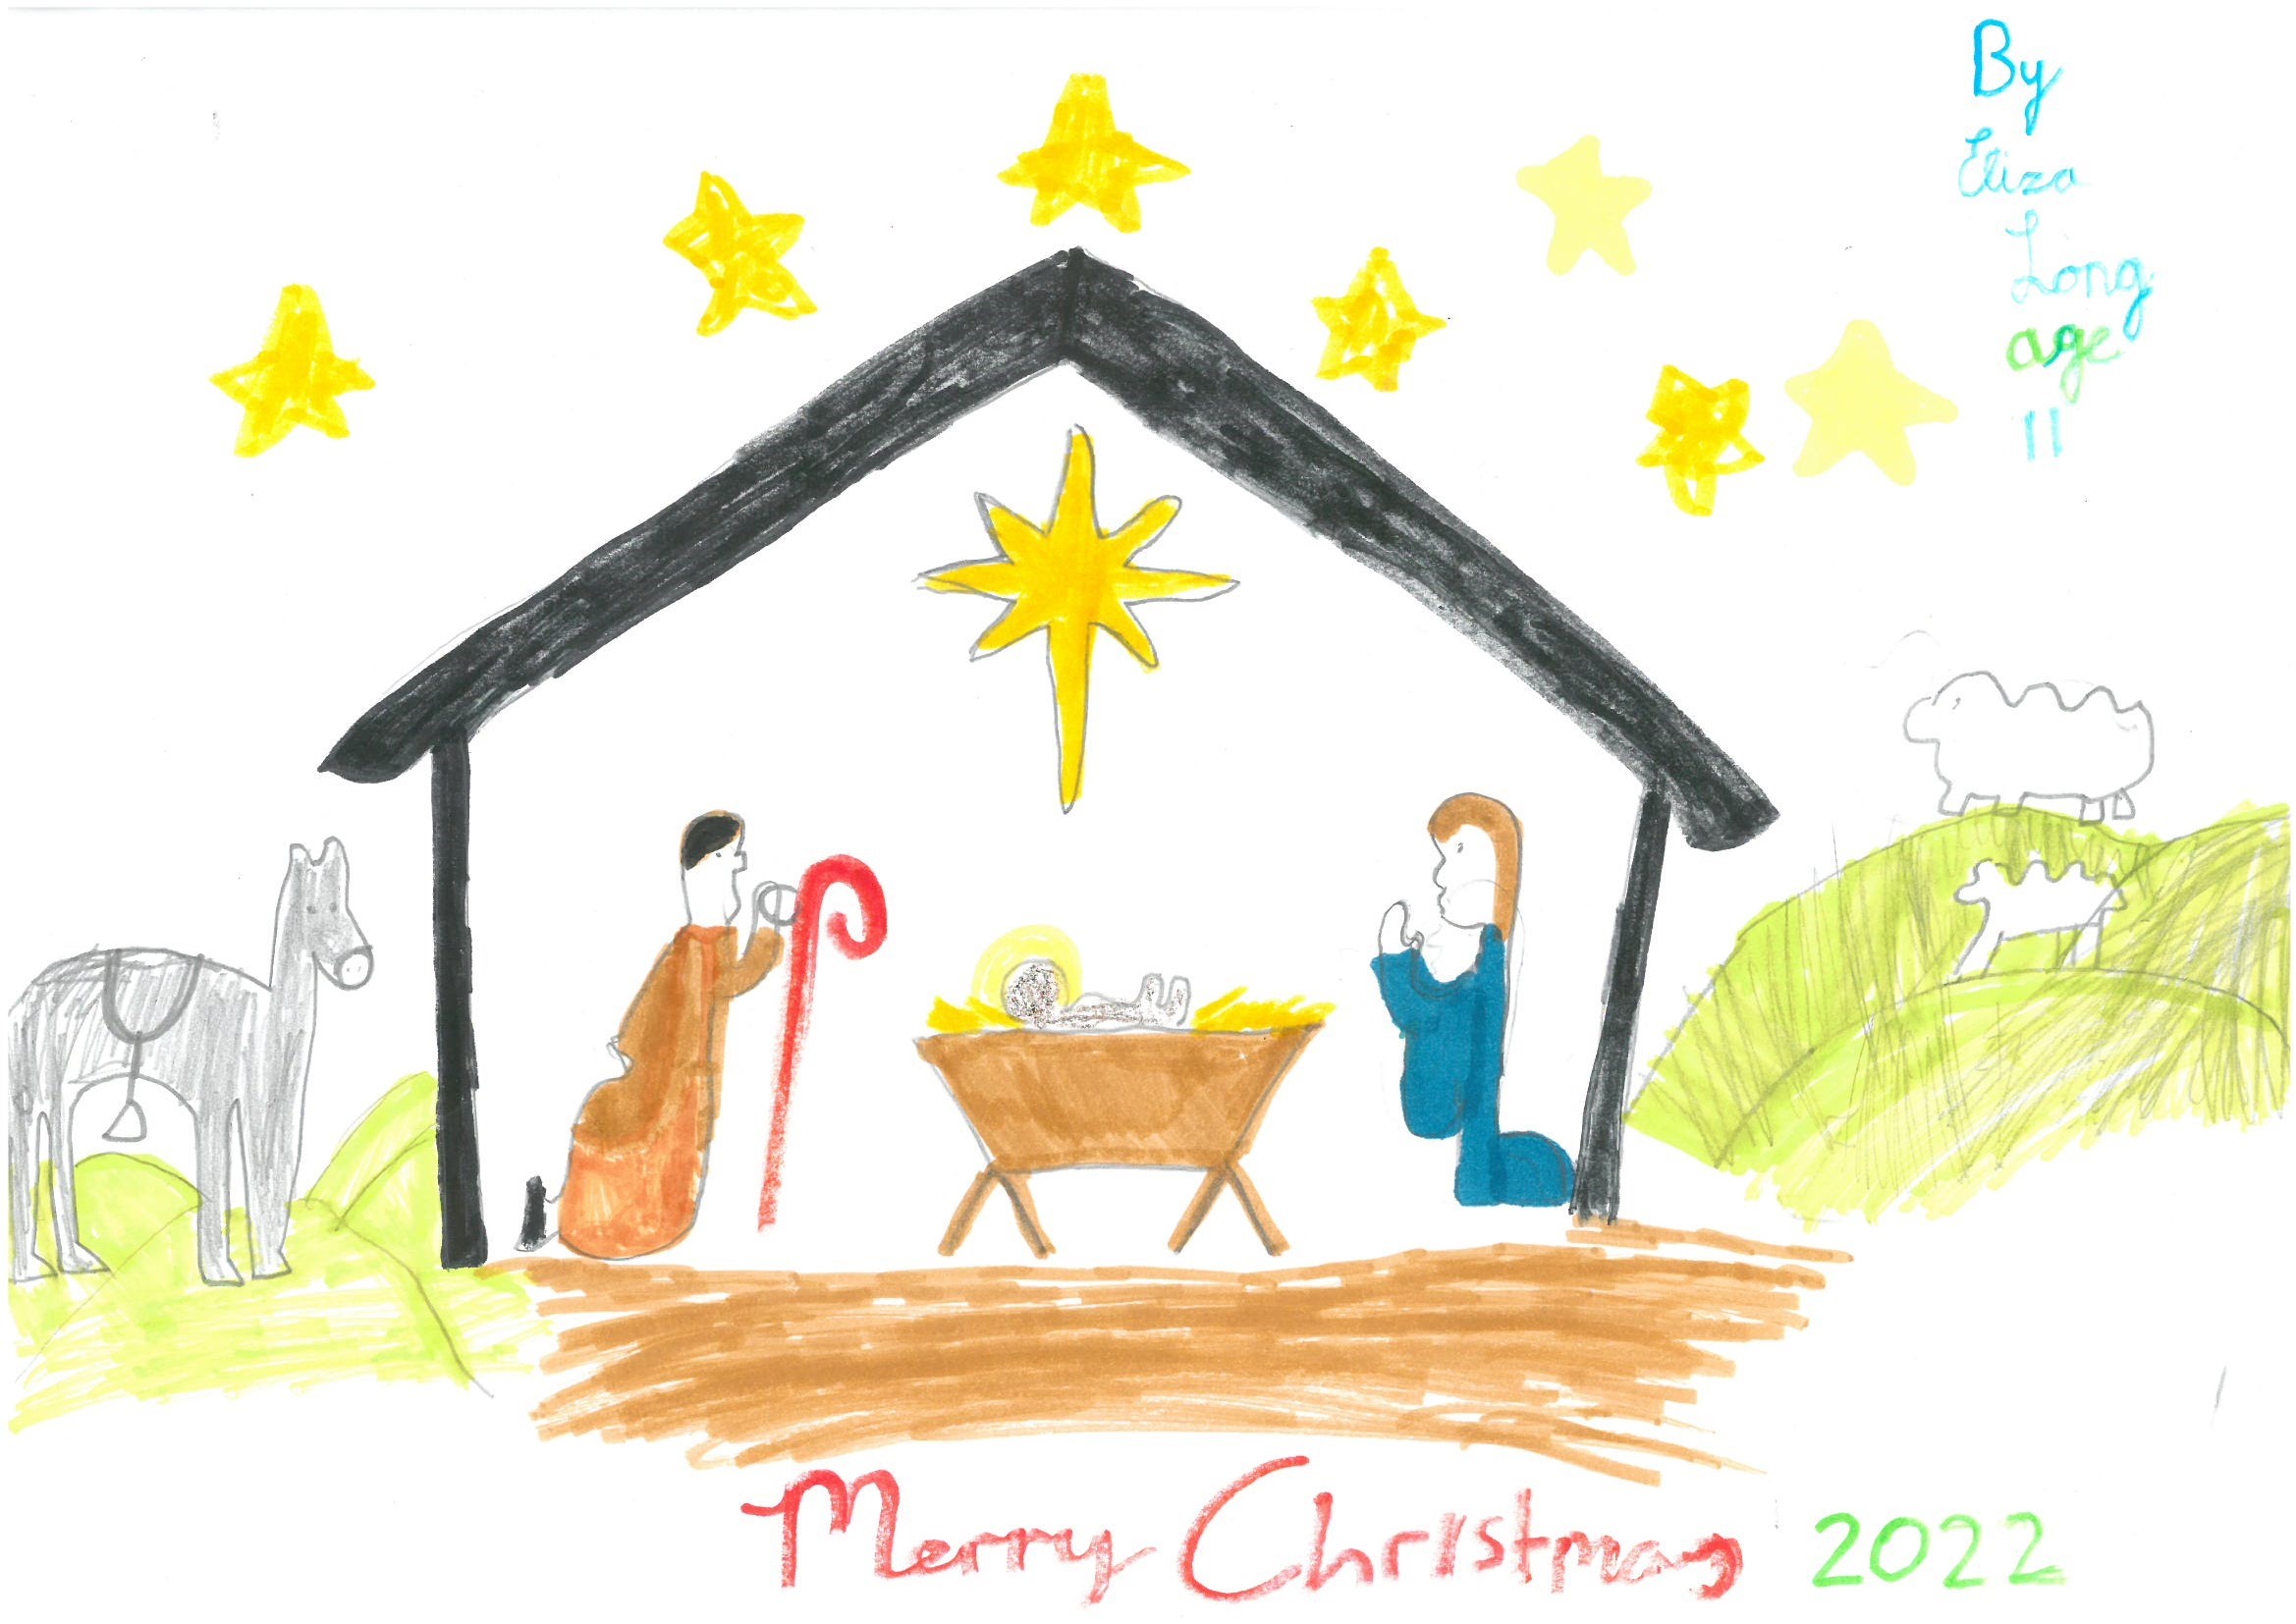 Wishing you a Happy and Holy Christmas 2022 from the Catholic Communications Office  of the Irish Bishops’ Conference